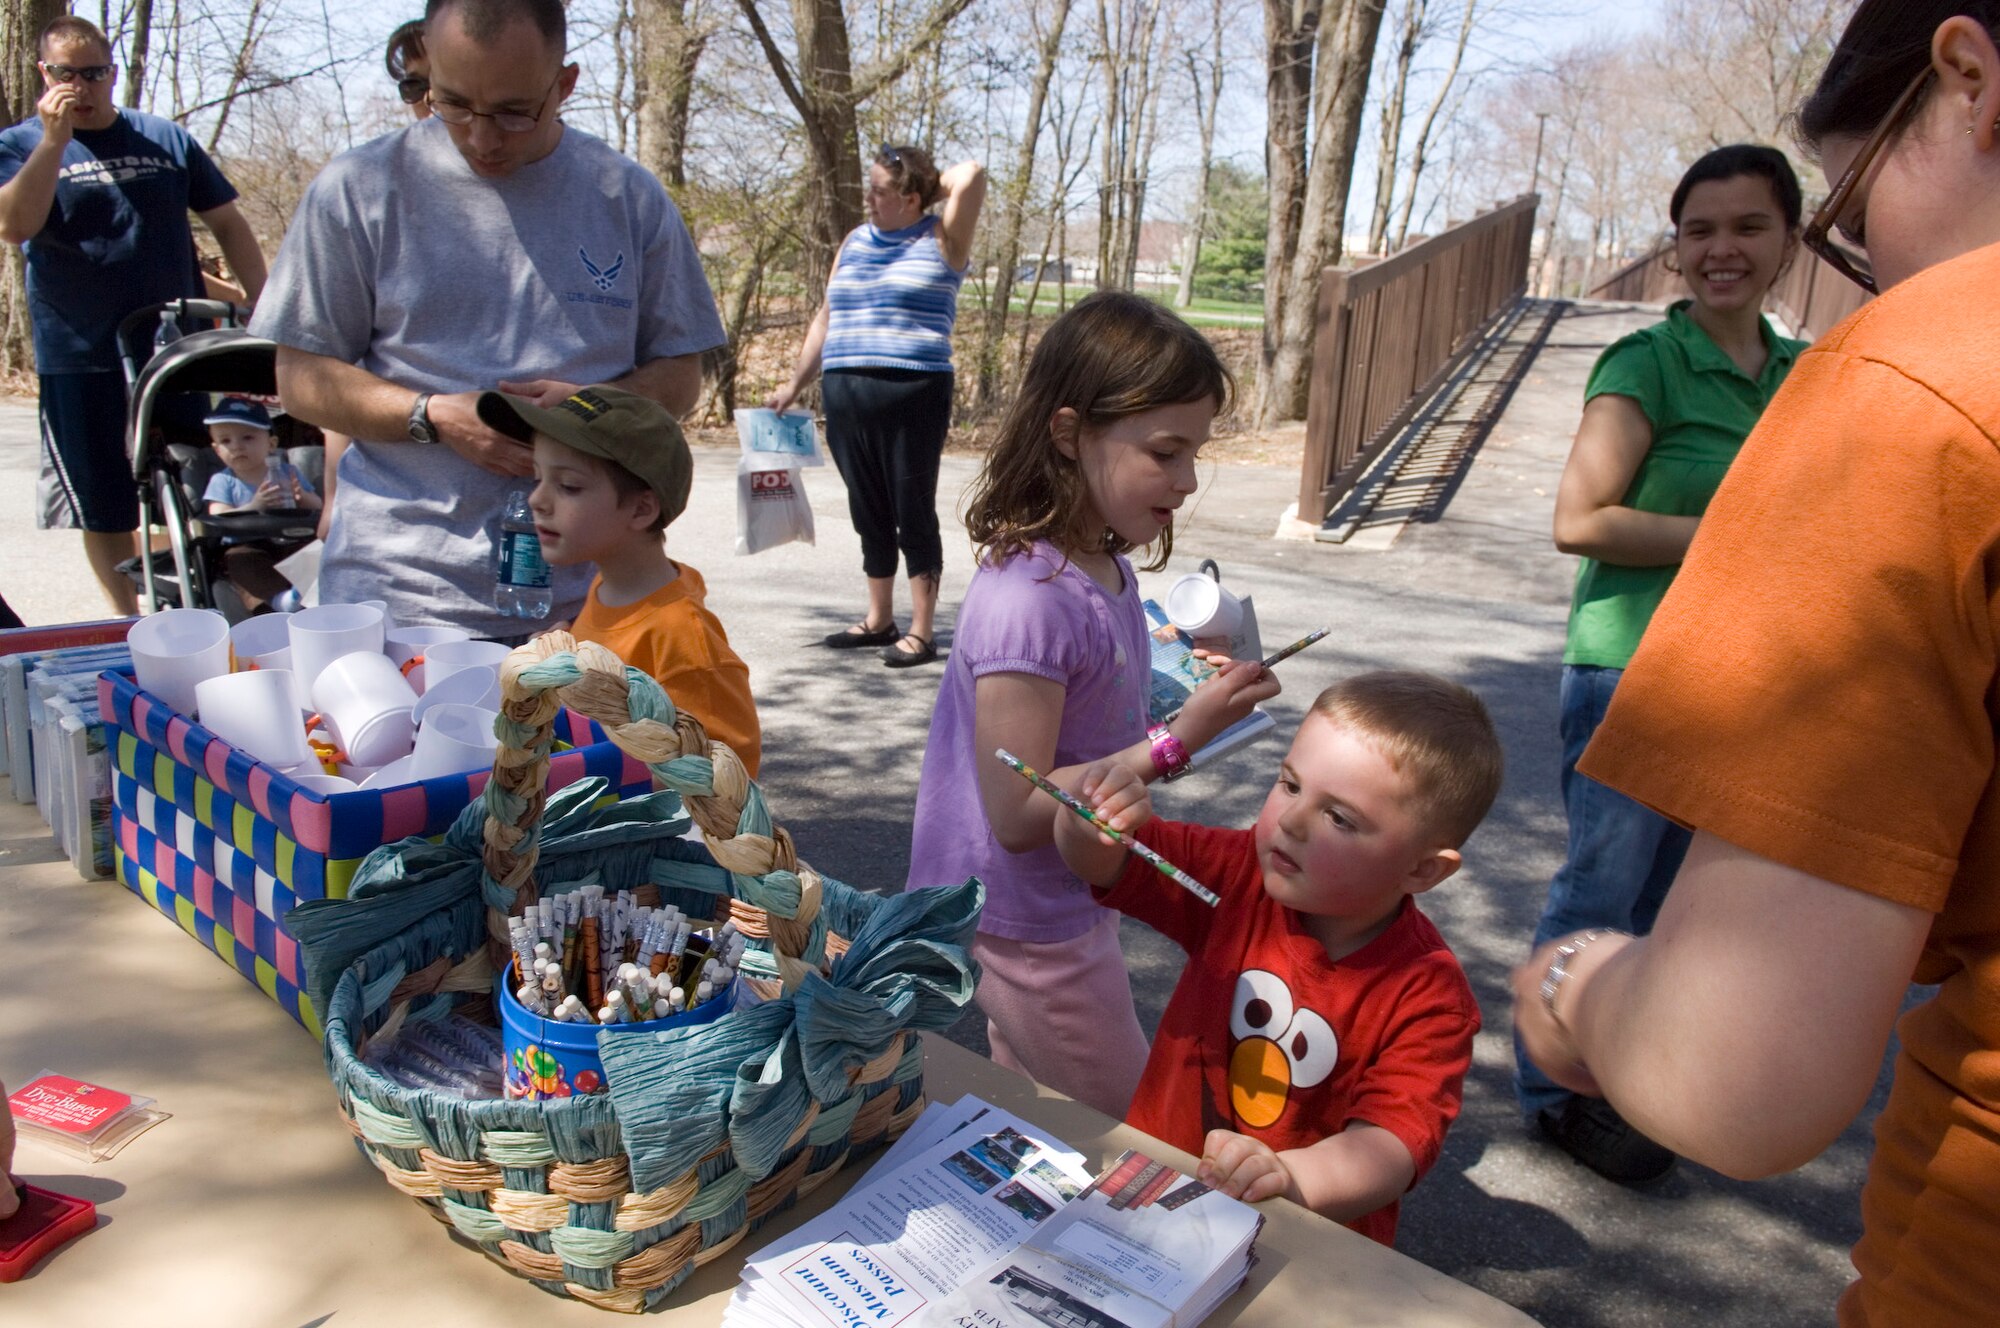 HANSCOM AIR FORCE BASE, Mass. – Families stop to pick up items at one of the informational booths set up at the Walk and Talk event at Castle Park on April 25. The event was part of the base’s Month of the Military Child celebrations. (U.S. Air Force photo by Rick Berry) 